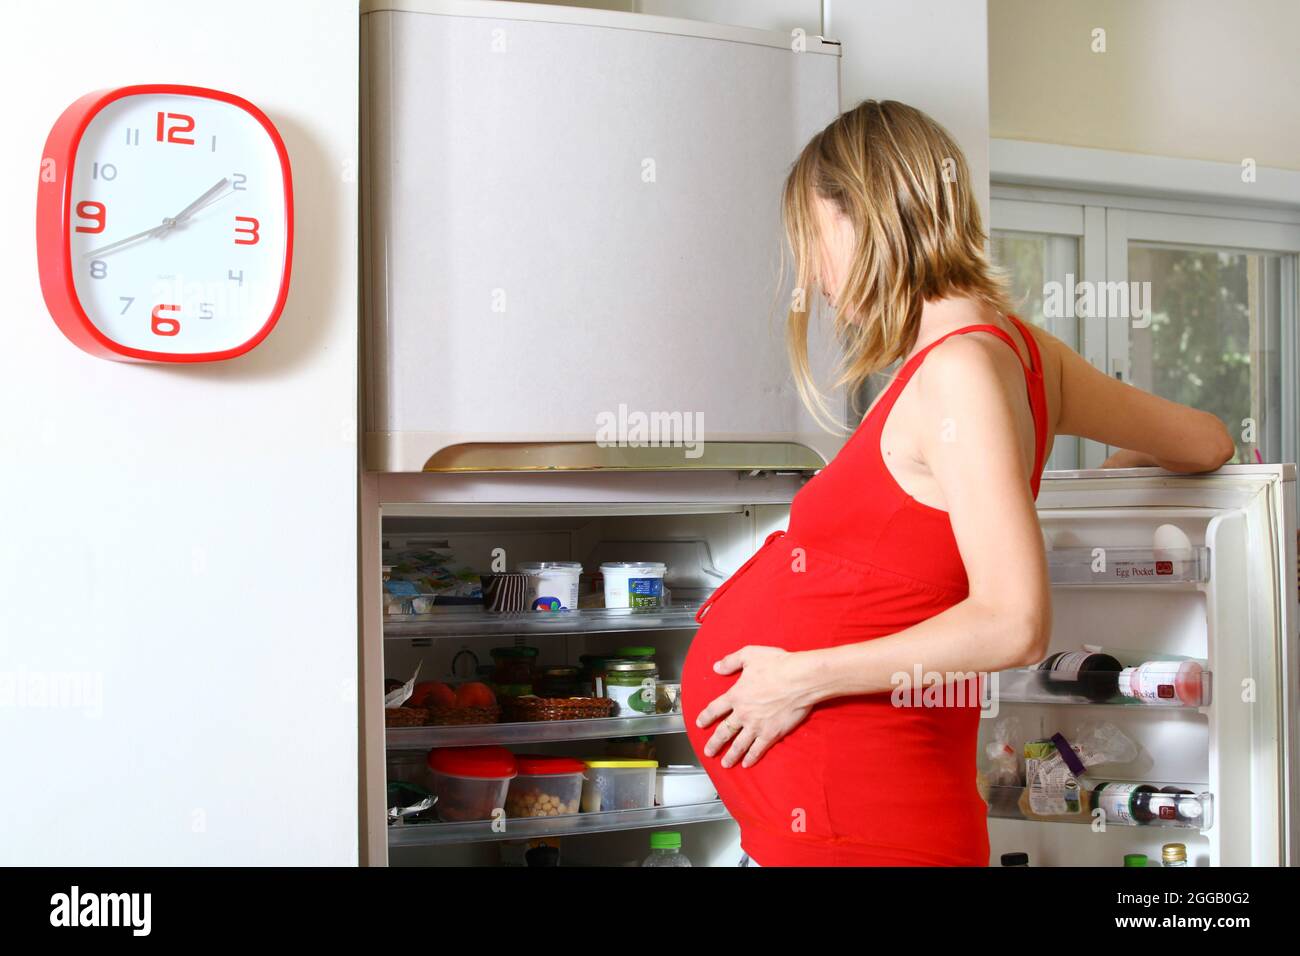 Craving pregnant woman looks for food in the fridge Stock Photo